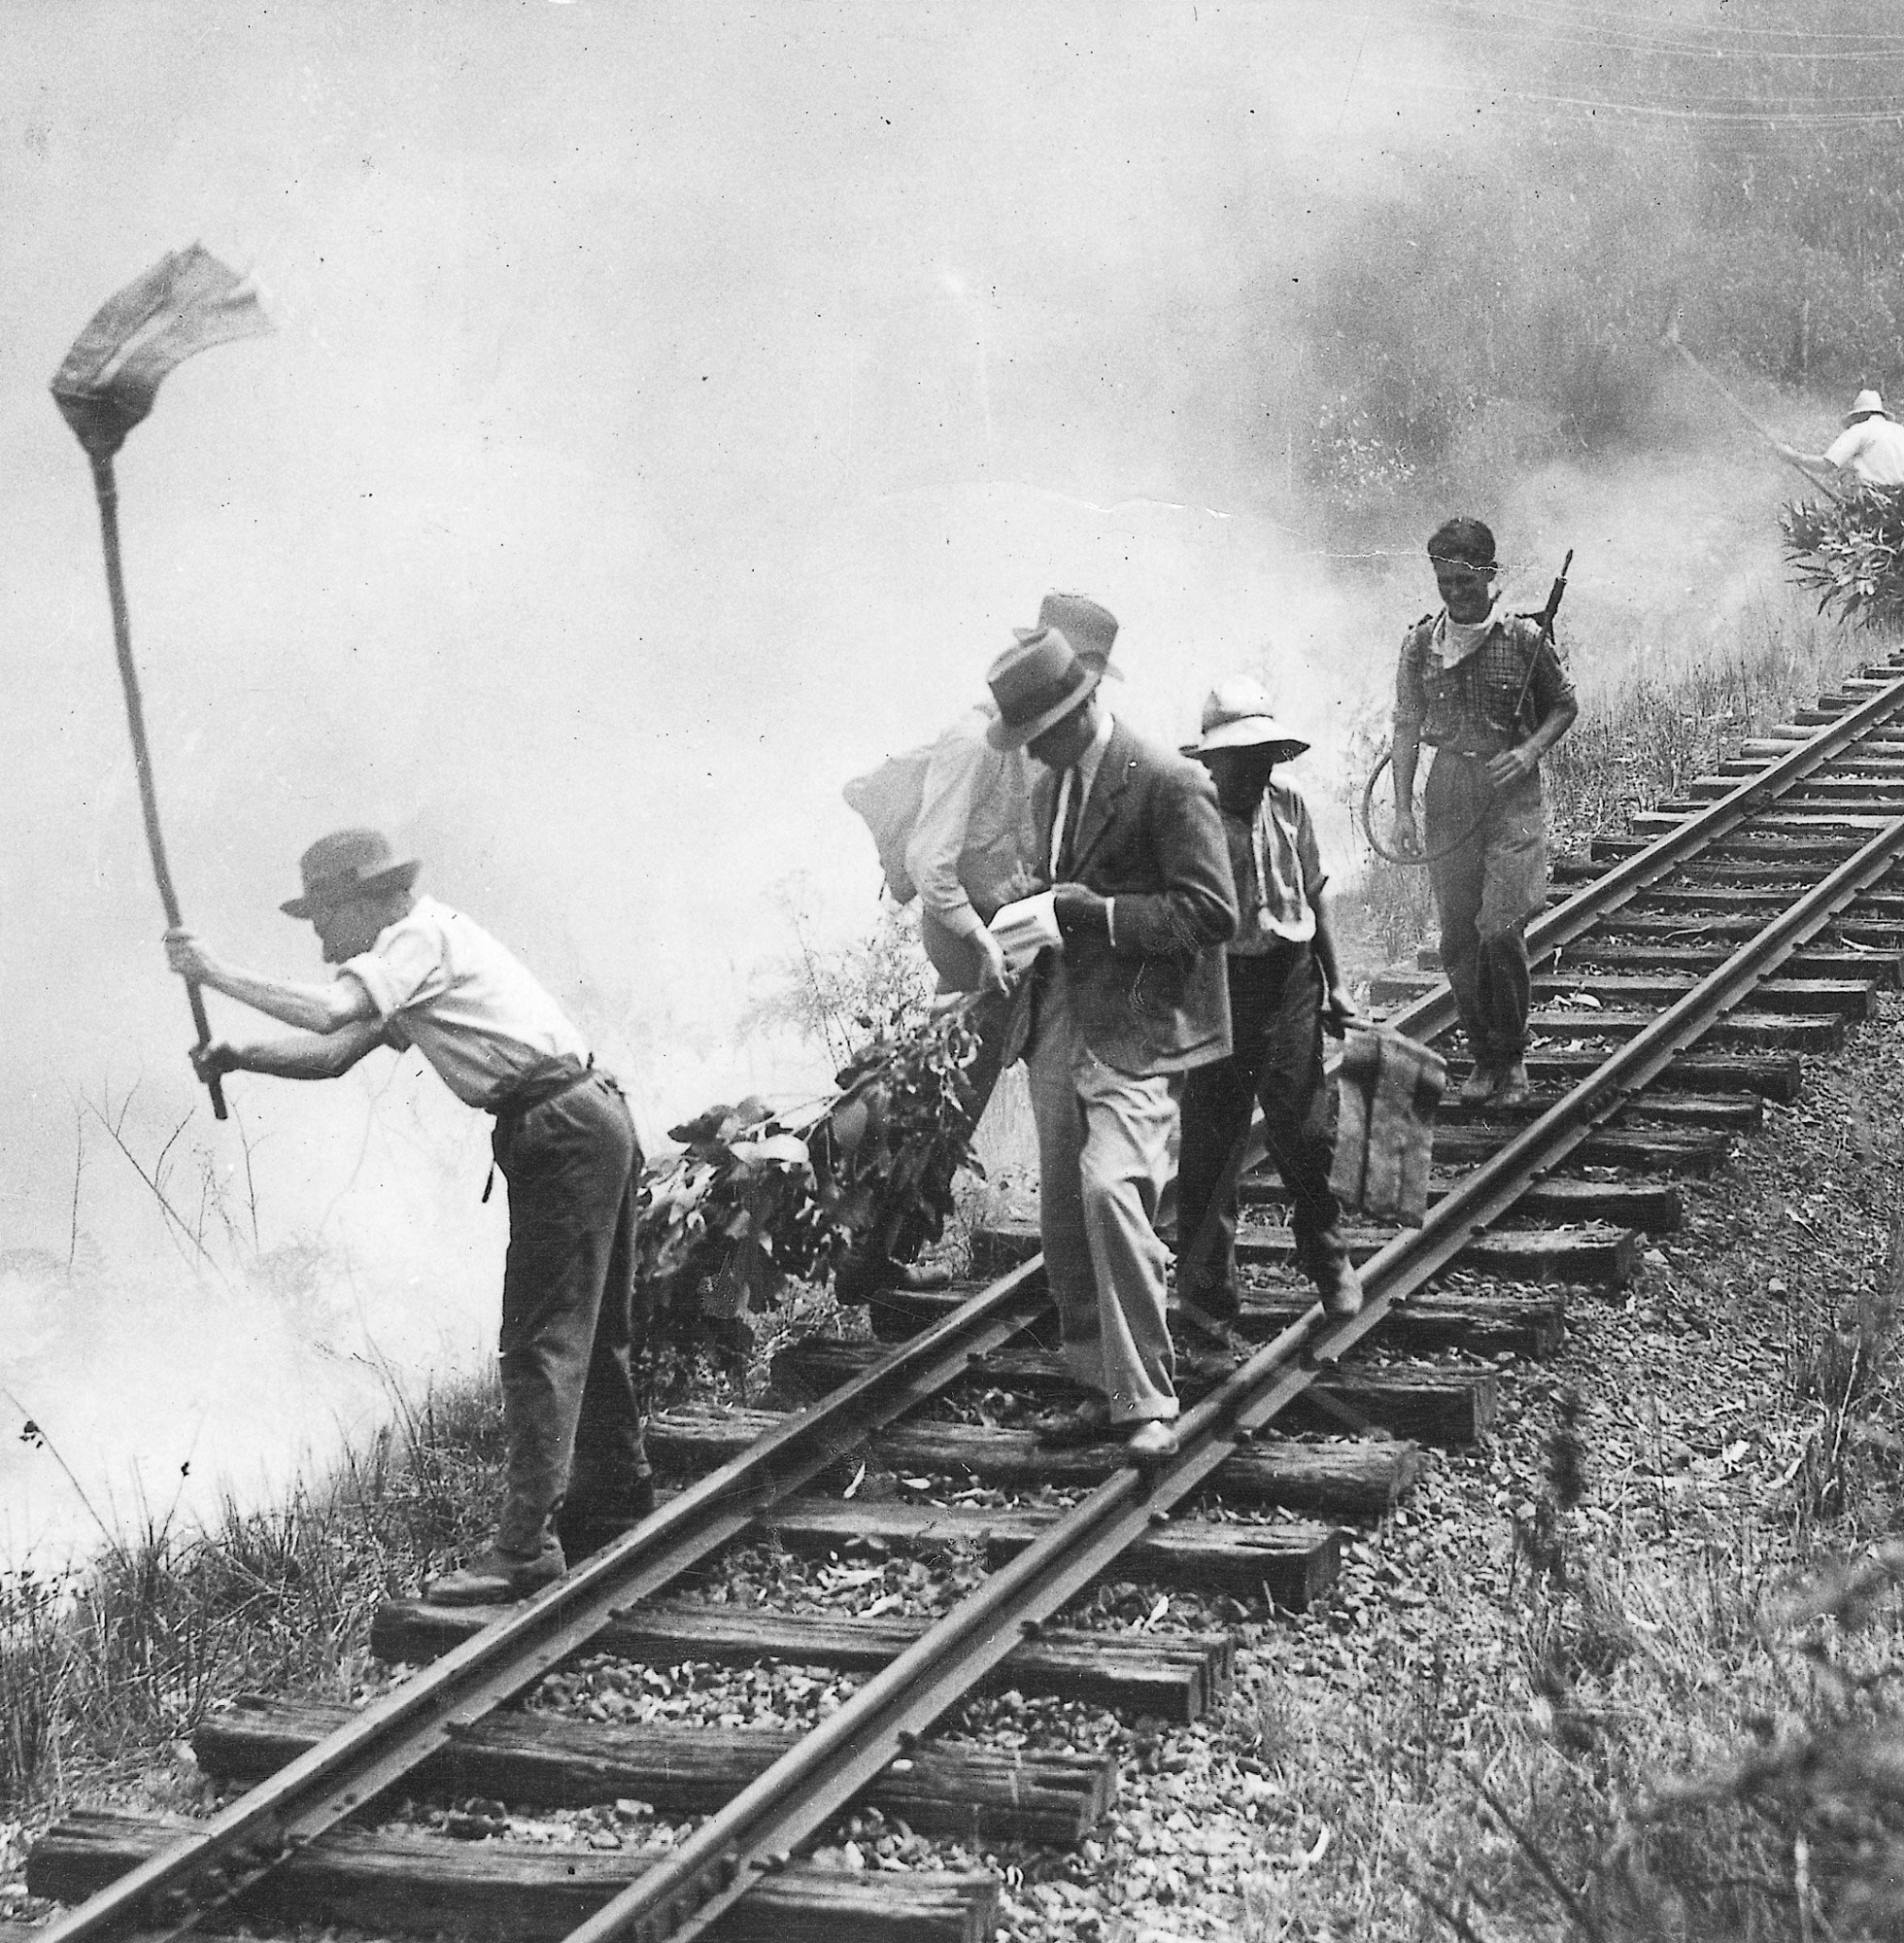 Firefighting during the 1939 Black Friday bushfires, Victoria.